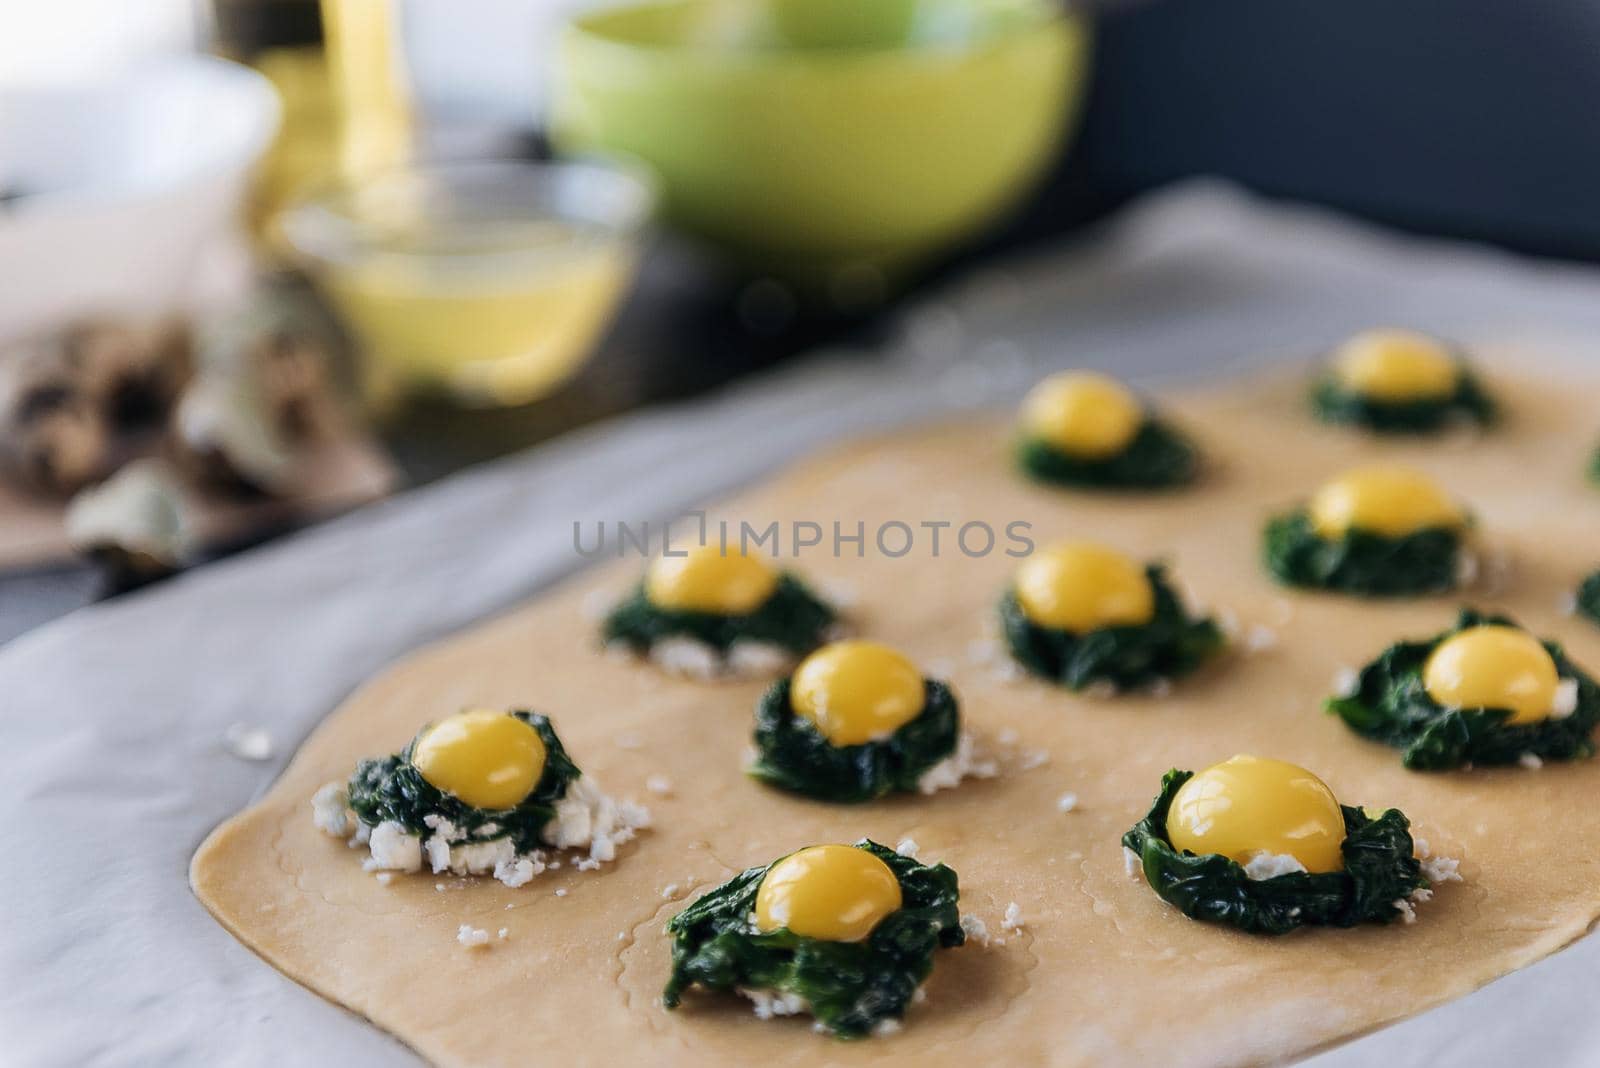 Step by step the chef prepares ravioli with ricotta cheese, yolks quail eggs and spinach with spices. The chef prepares the filling on the dough by vvmich